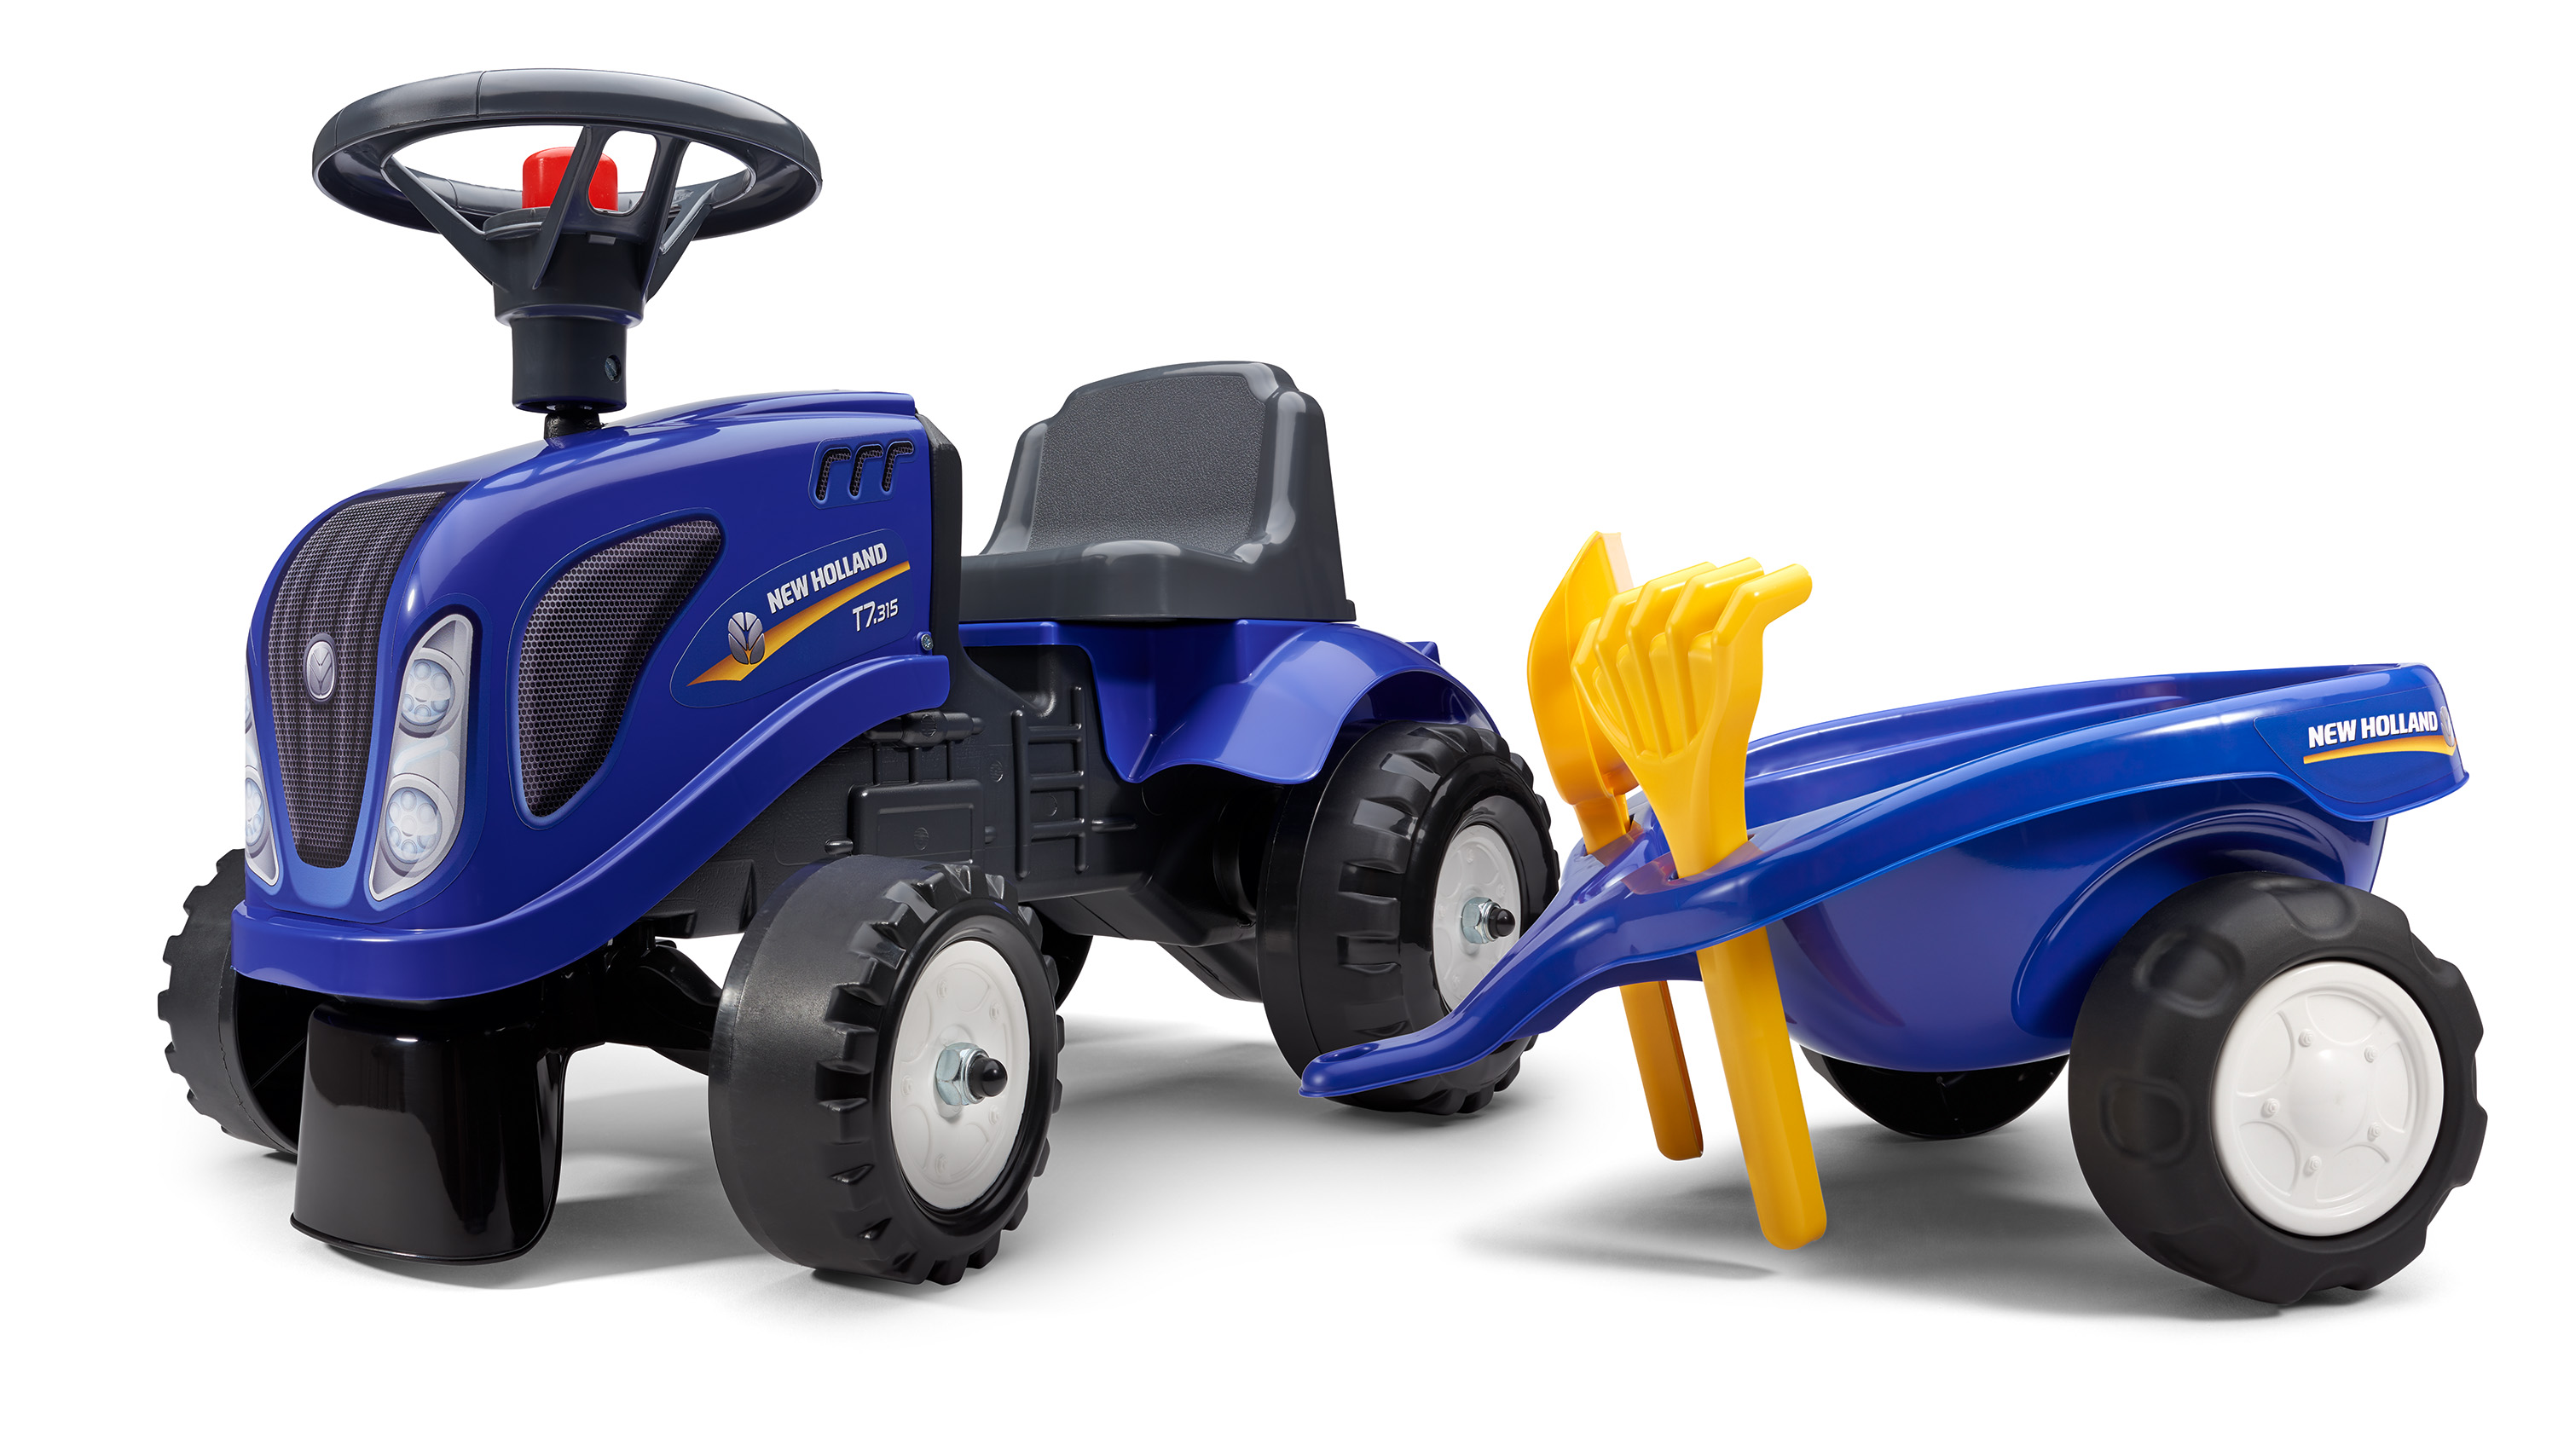 Falk New Holland Ride-On and Push-Along tractor with trailer and tools +1 year